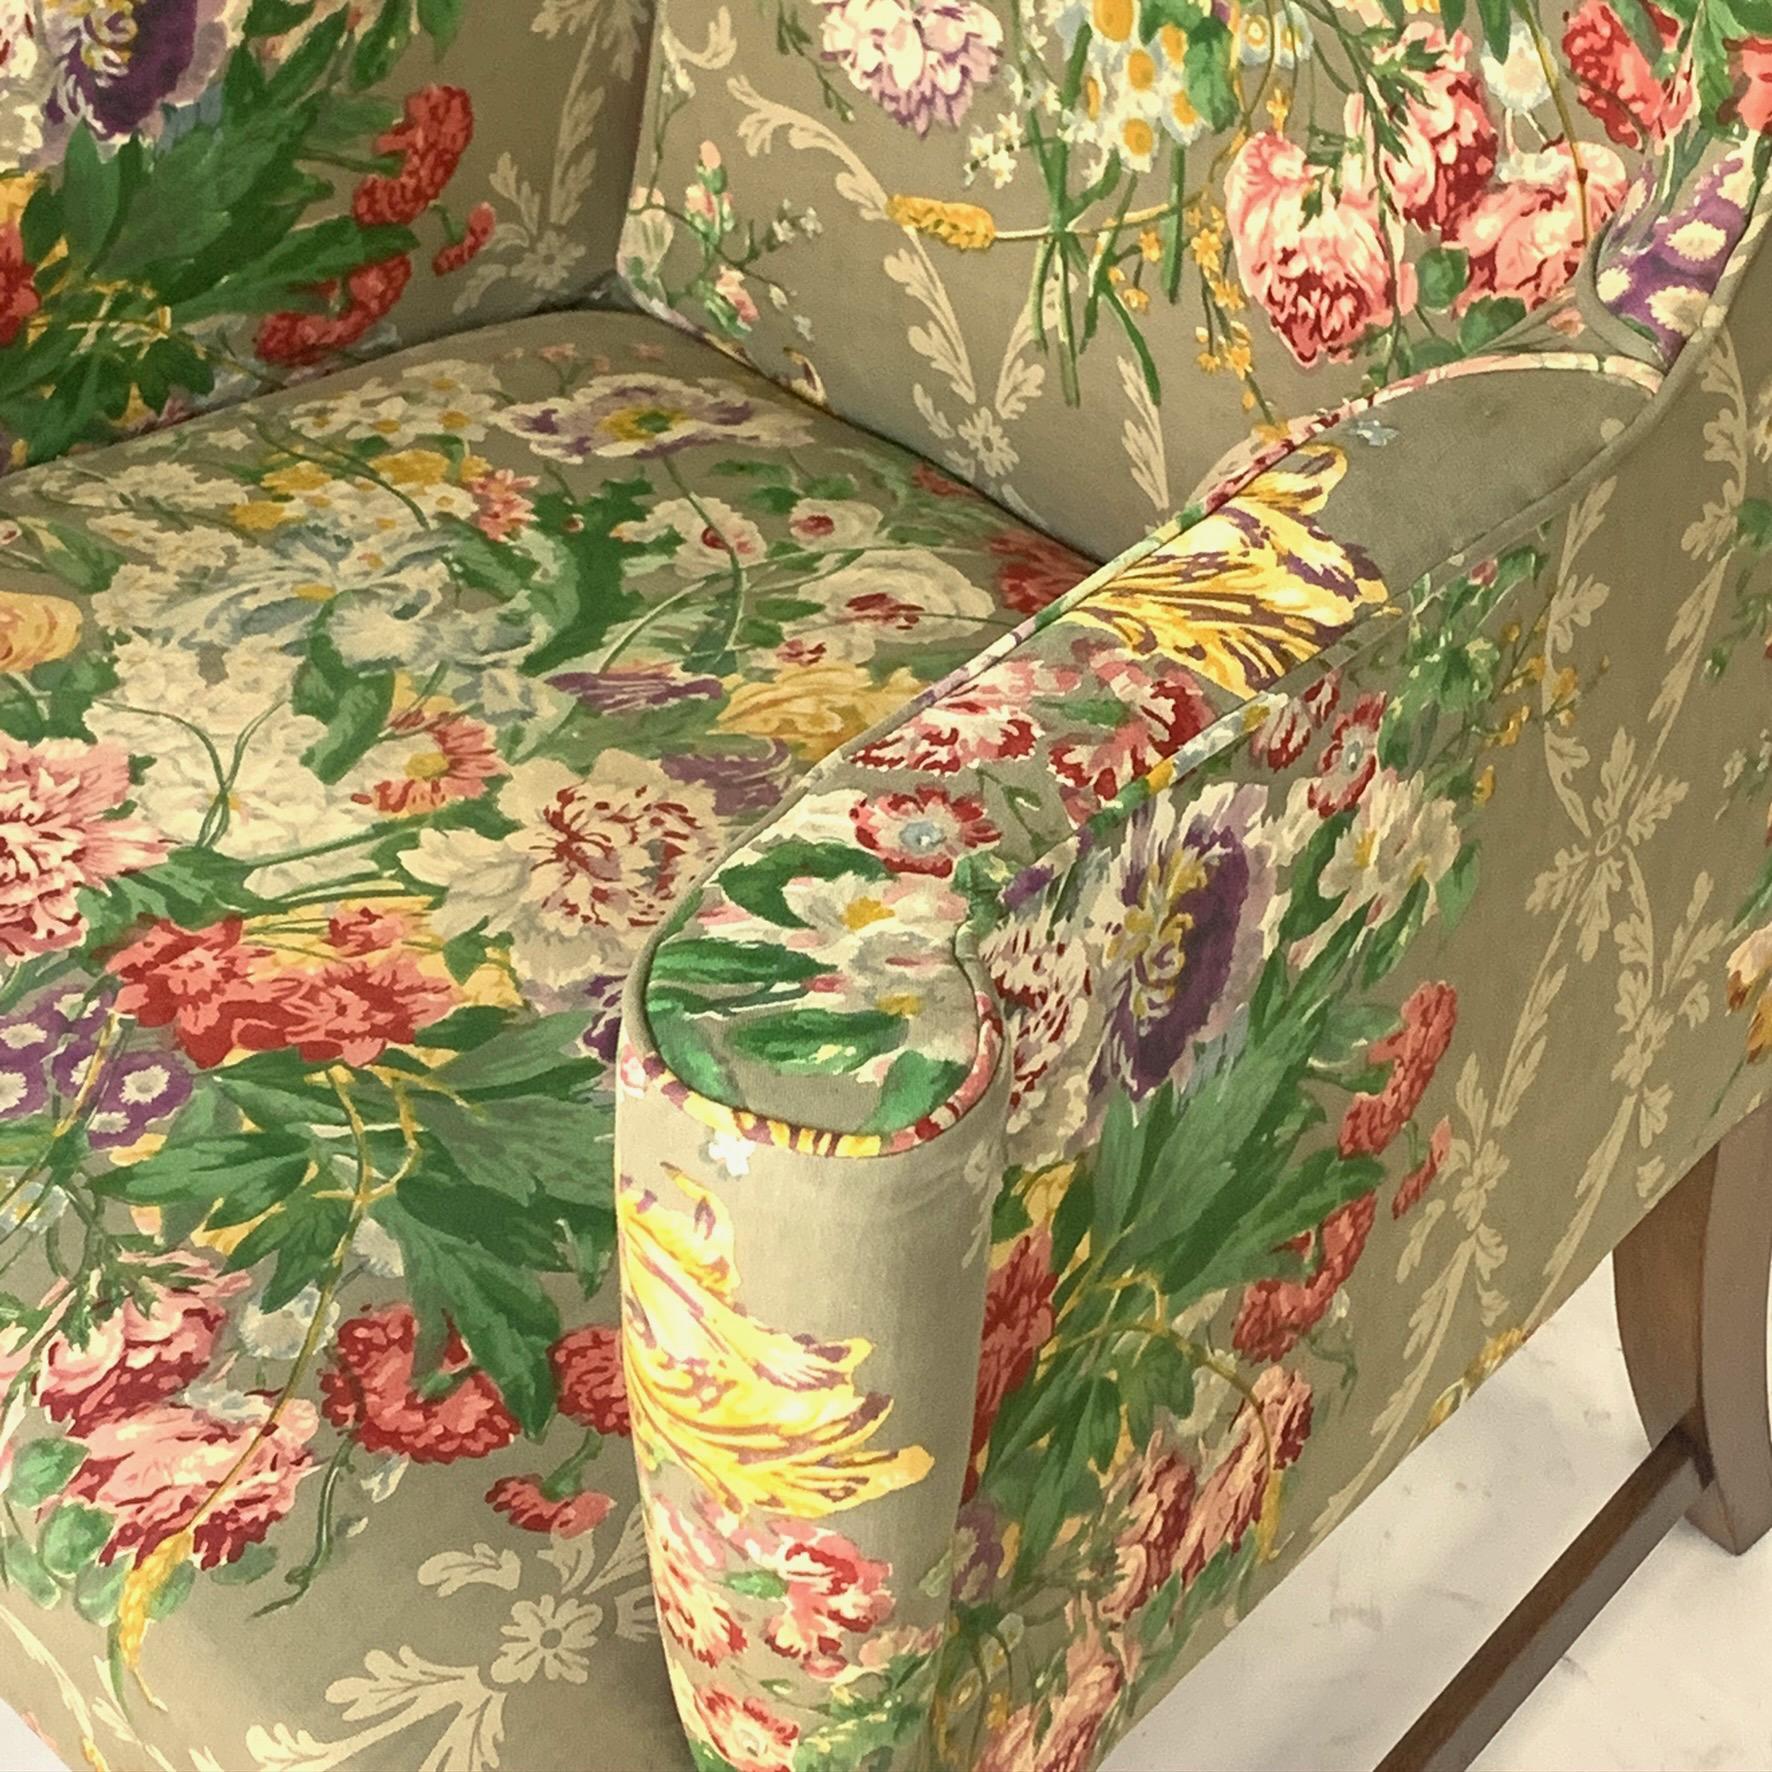 Exceptional Early American Wingback Chairs with Stunning Floral Upholstery 5